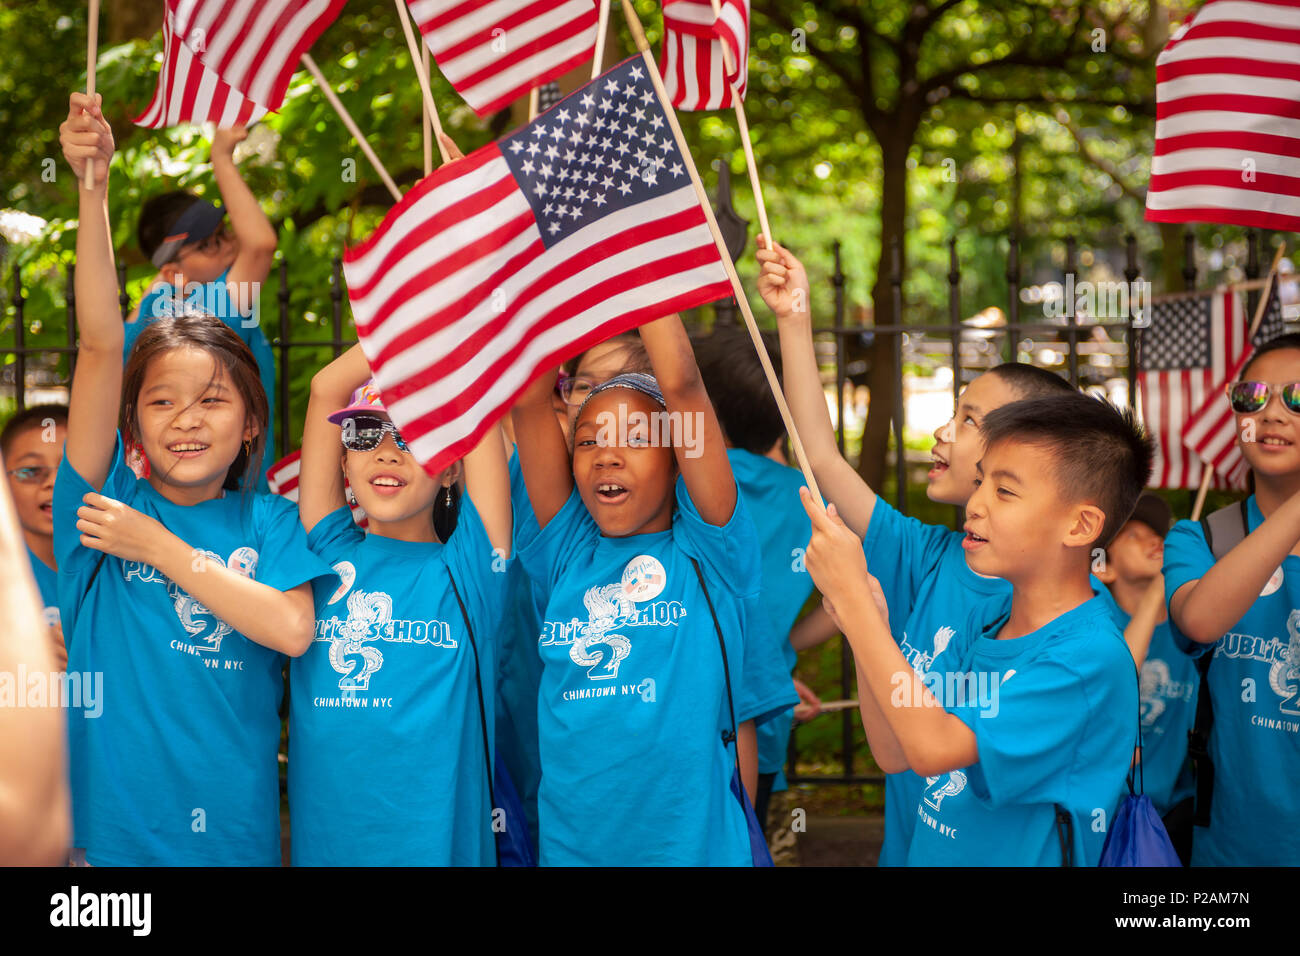 New York, USA. 14th Jun, 2018. Students from PS 2 march in the annual Flag Day Parade in New York on Thursday, June 14, 2018, starting at New York City Hall Park.  Flag Day was created by proclamation by President Woodrow Wilson on June 14, 1916 as a holiday honoring America's flag but it was not until 1949 when it became National Flag Day.  The holiday honors the 1777 Flag Resolution where the stars and stripes were officially adopted as the flag of the United States. (© Richard B. Levine) Credit: Richard Levine/Alamy Live News Stock Photo